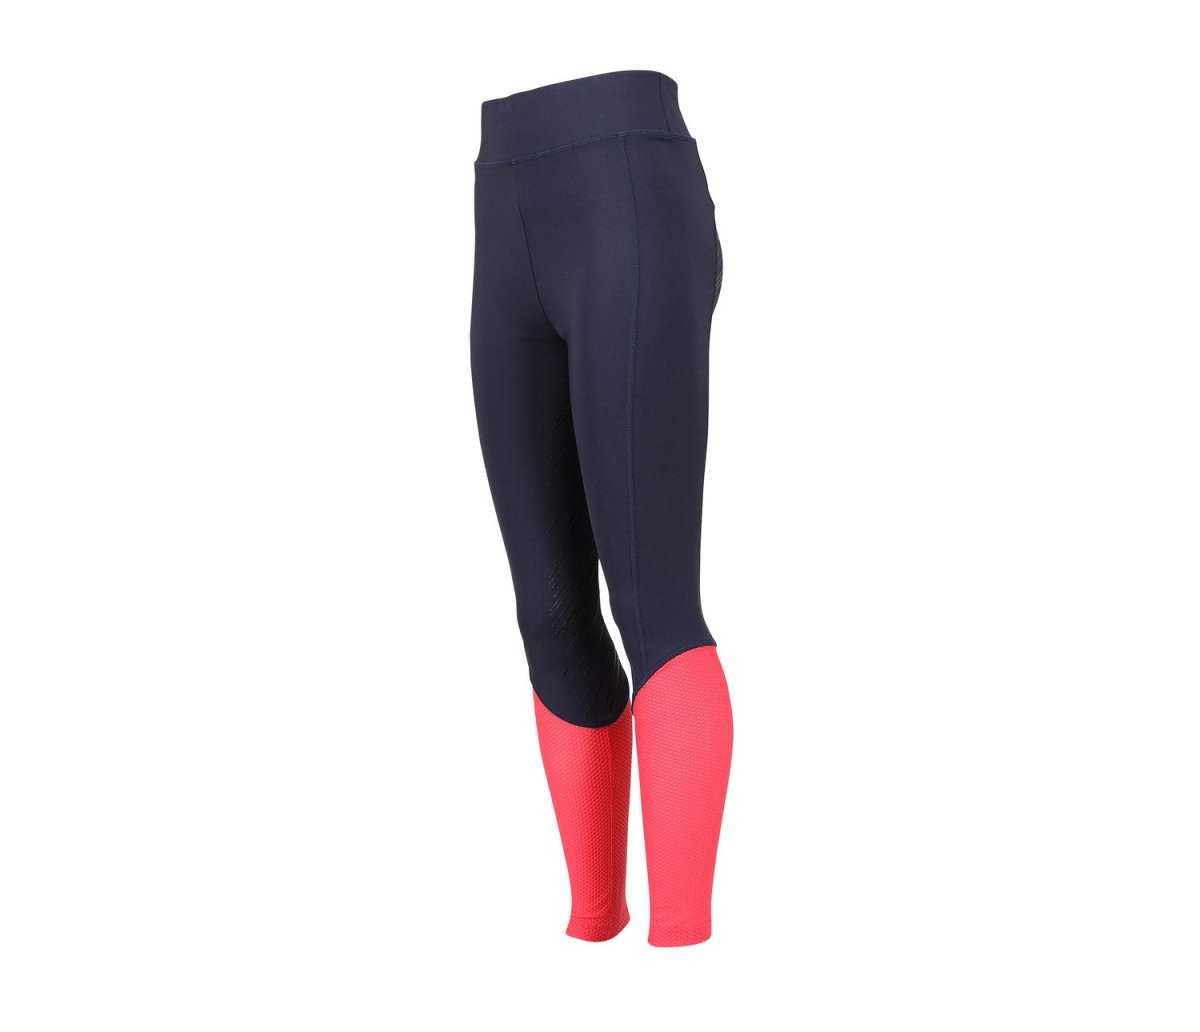 Aubrion SS24 Rhythm Mesh Riding Tights - Young Rider - Navy - 11/12 Years